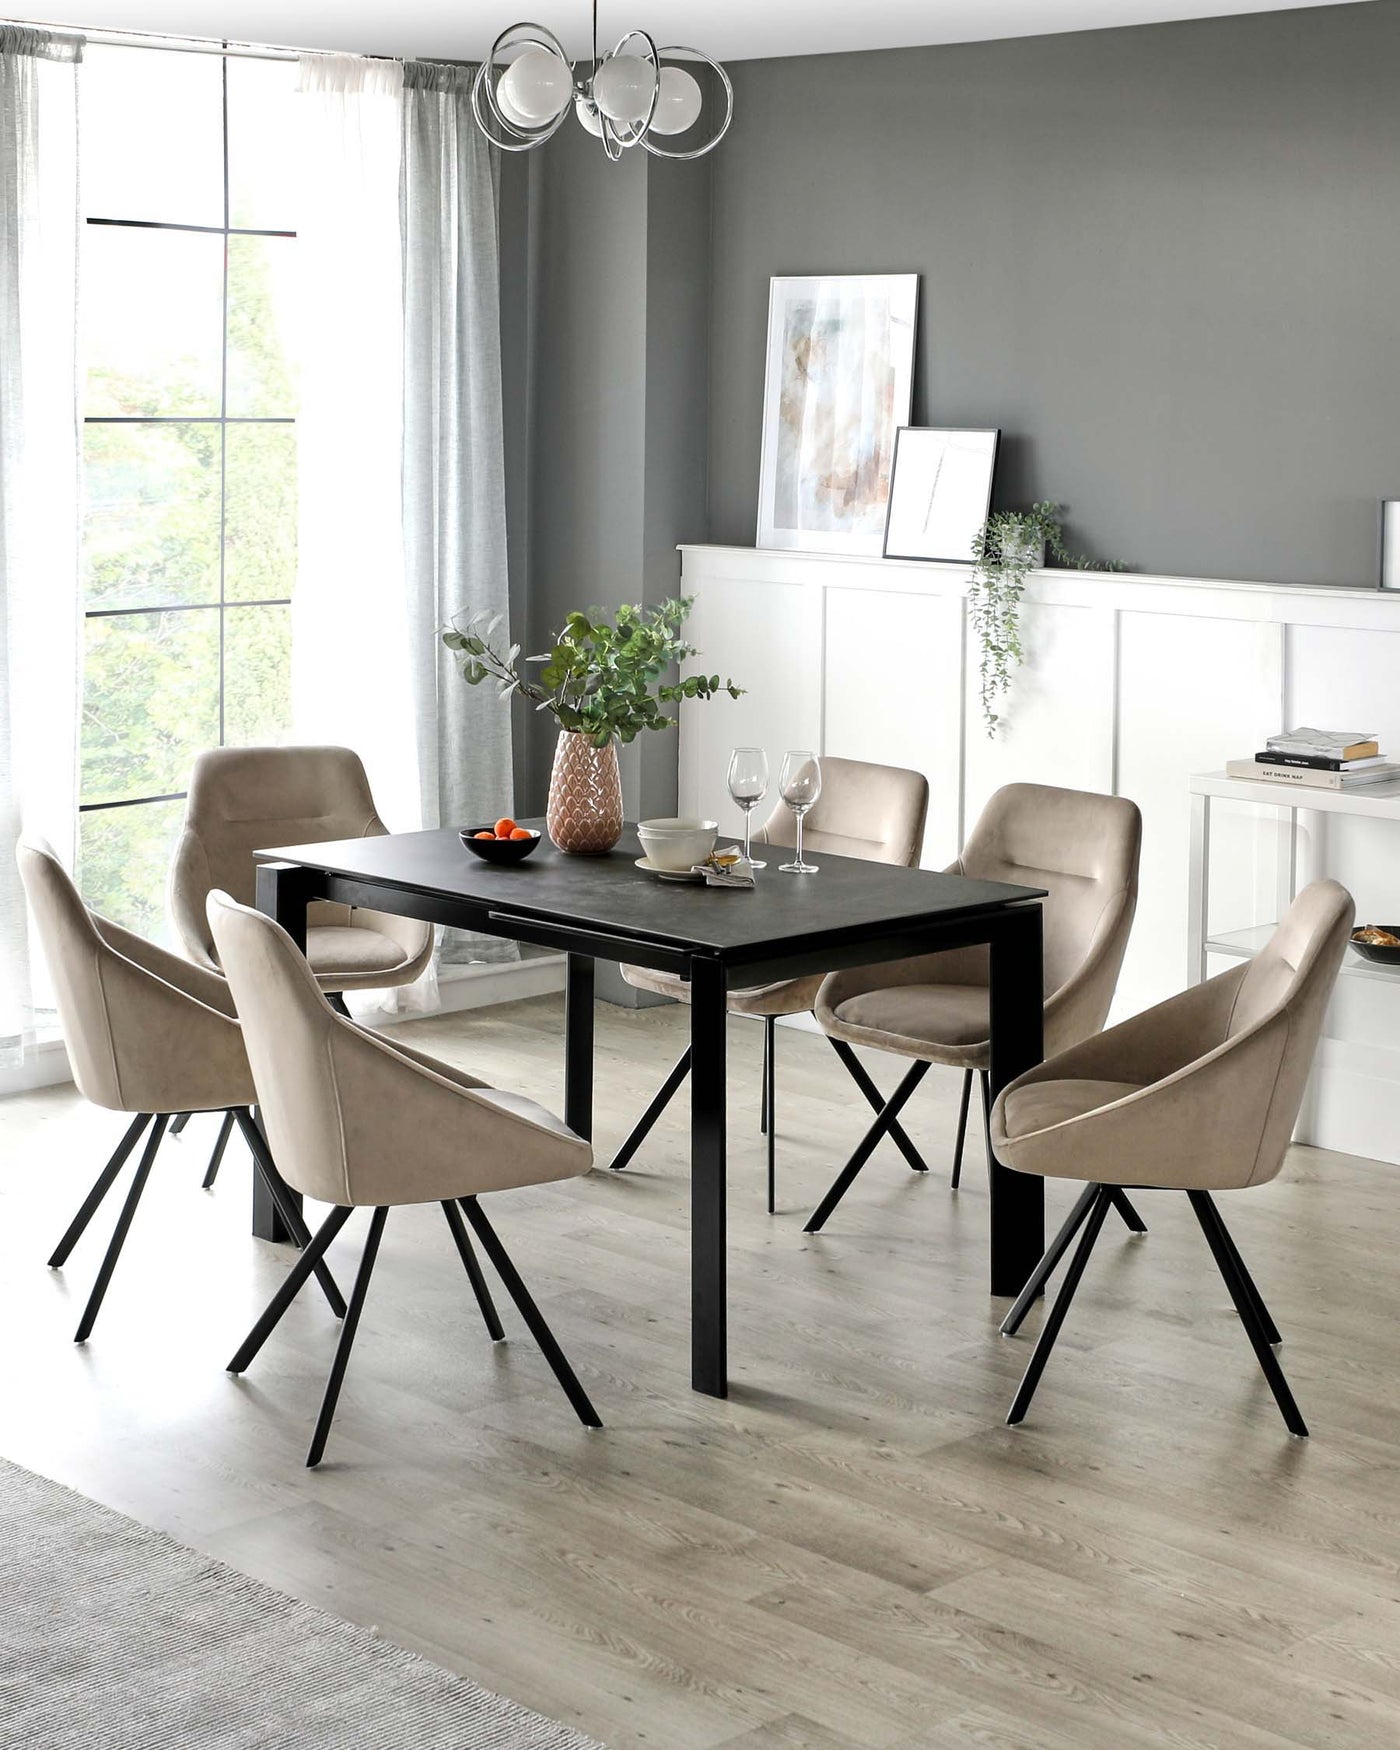 Modern dining room featuring a sleek black rectangular table with a smooth finish, surrounded by six upholstered chairs in a light taupe fabric. The chairs have a curved backrest and are supported by black metal legs that complement the table. A minimalist white sideboard with decorative items sits against the wall.